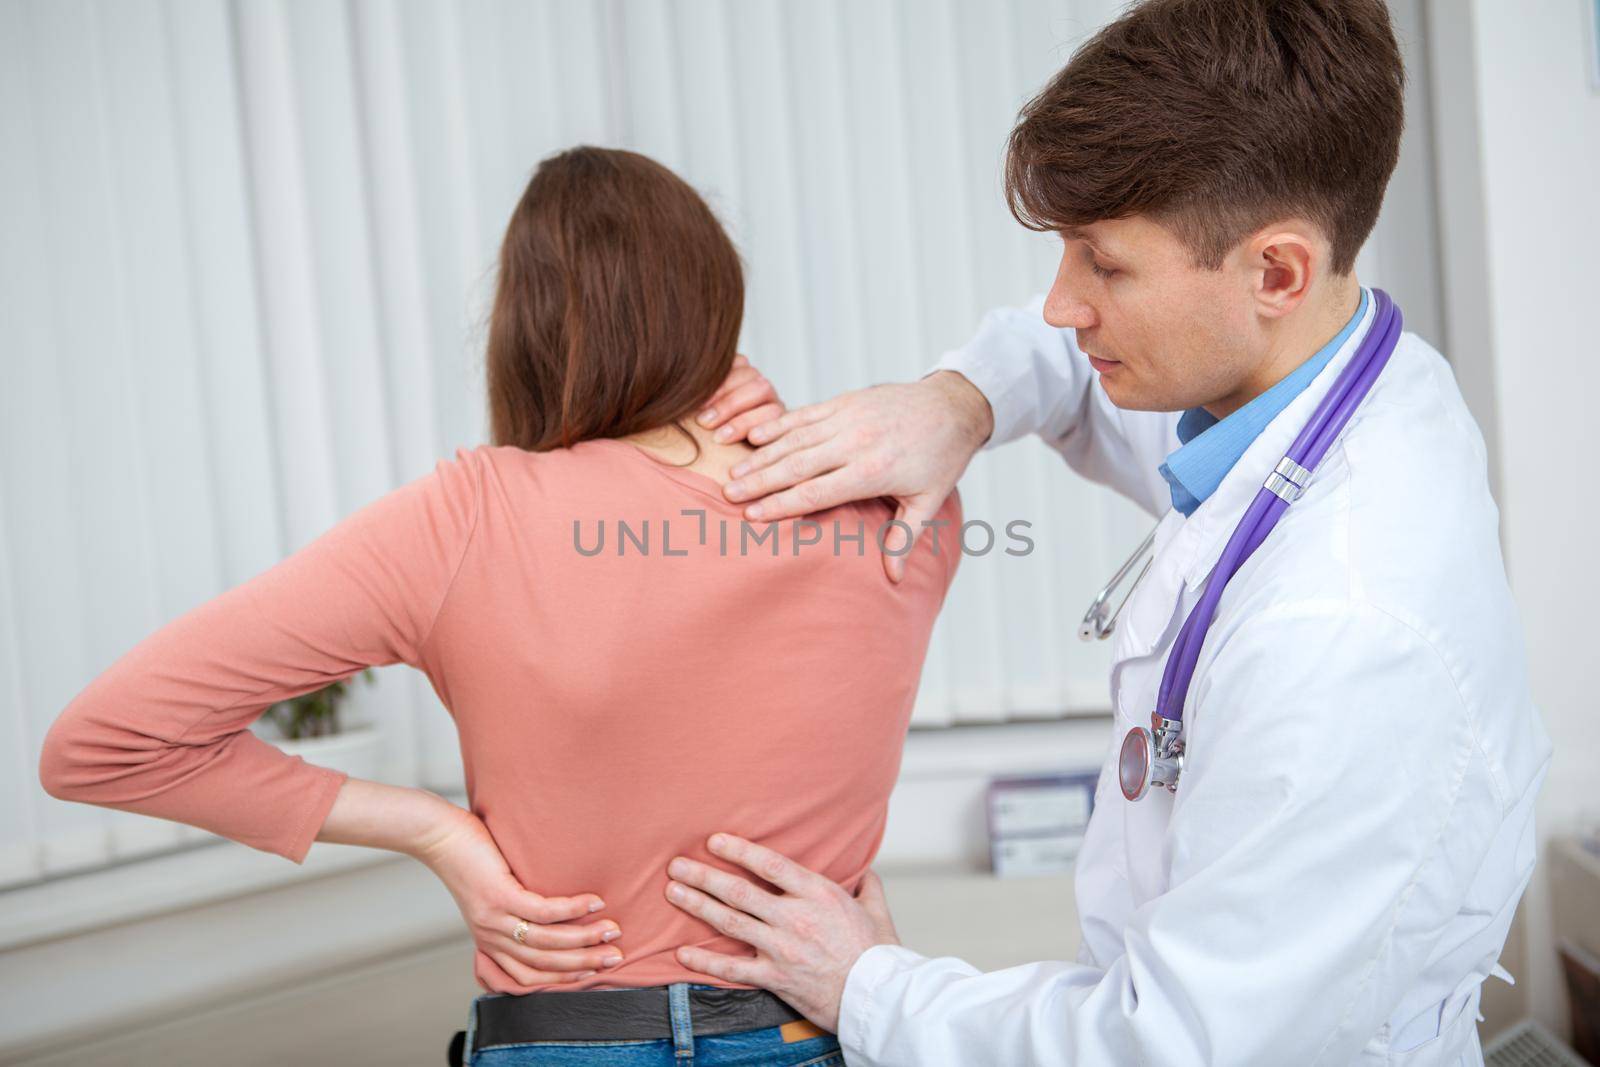 Female patient with back pain being examined by doctor